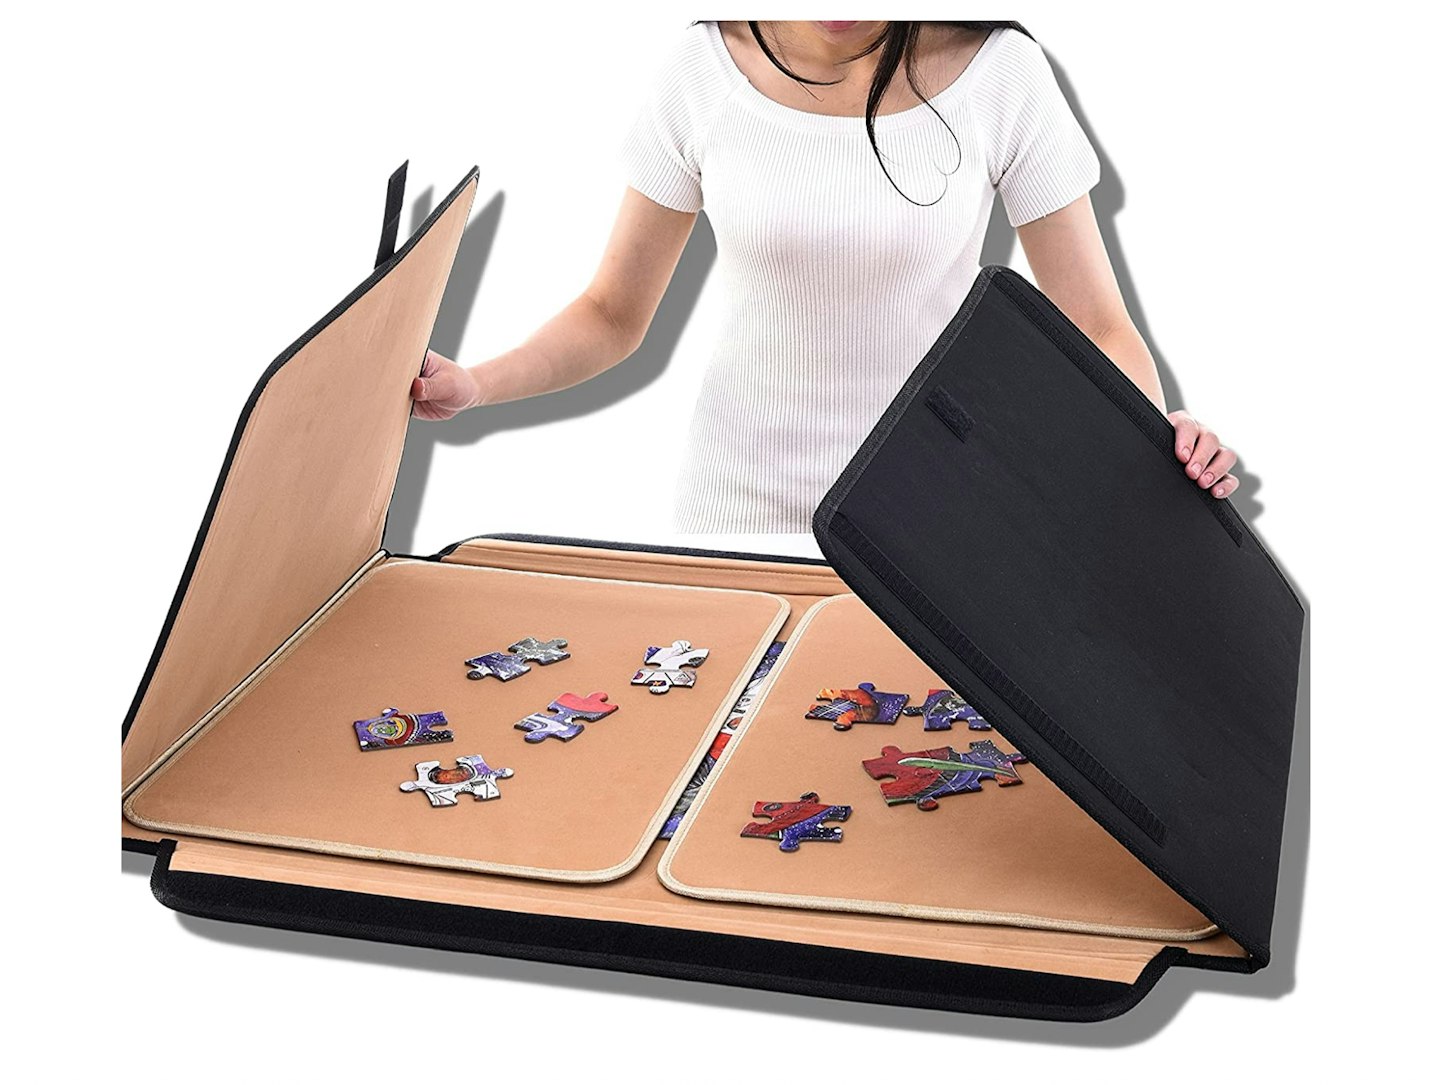 Jaques of London Deluxe Jigsaw Puzzle Board Portable Foldable